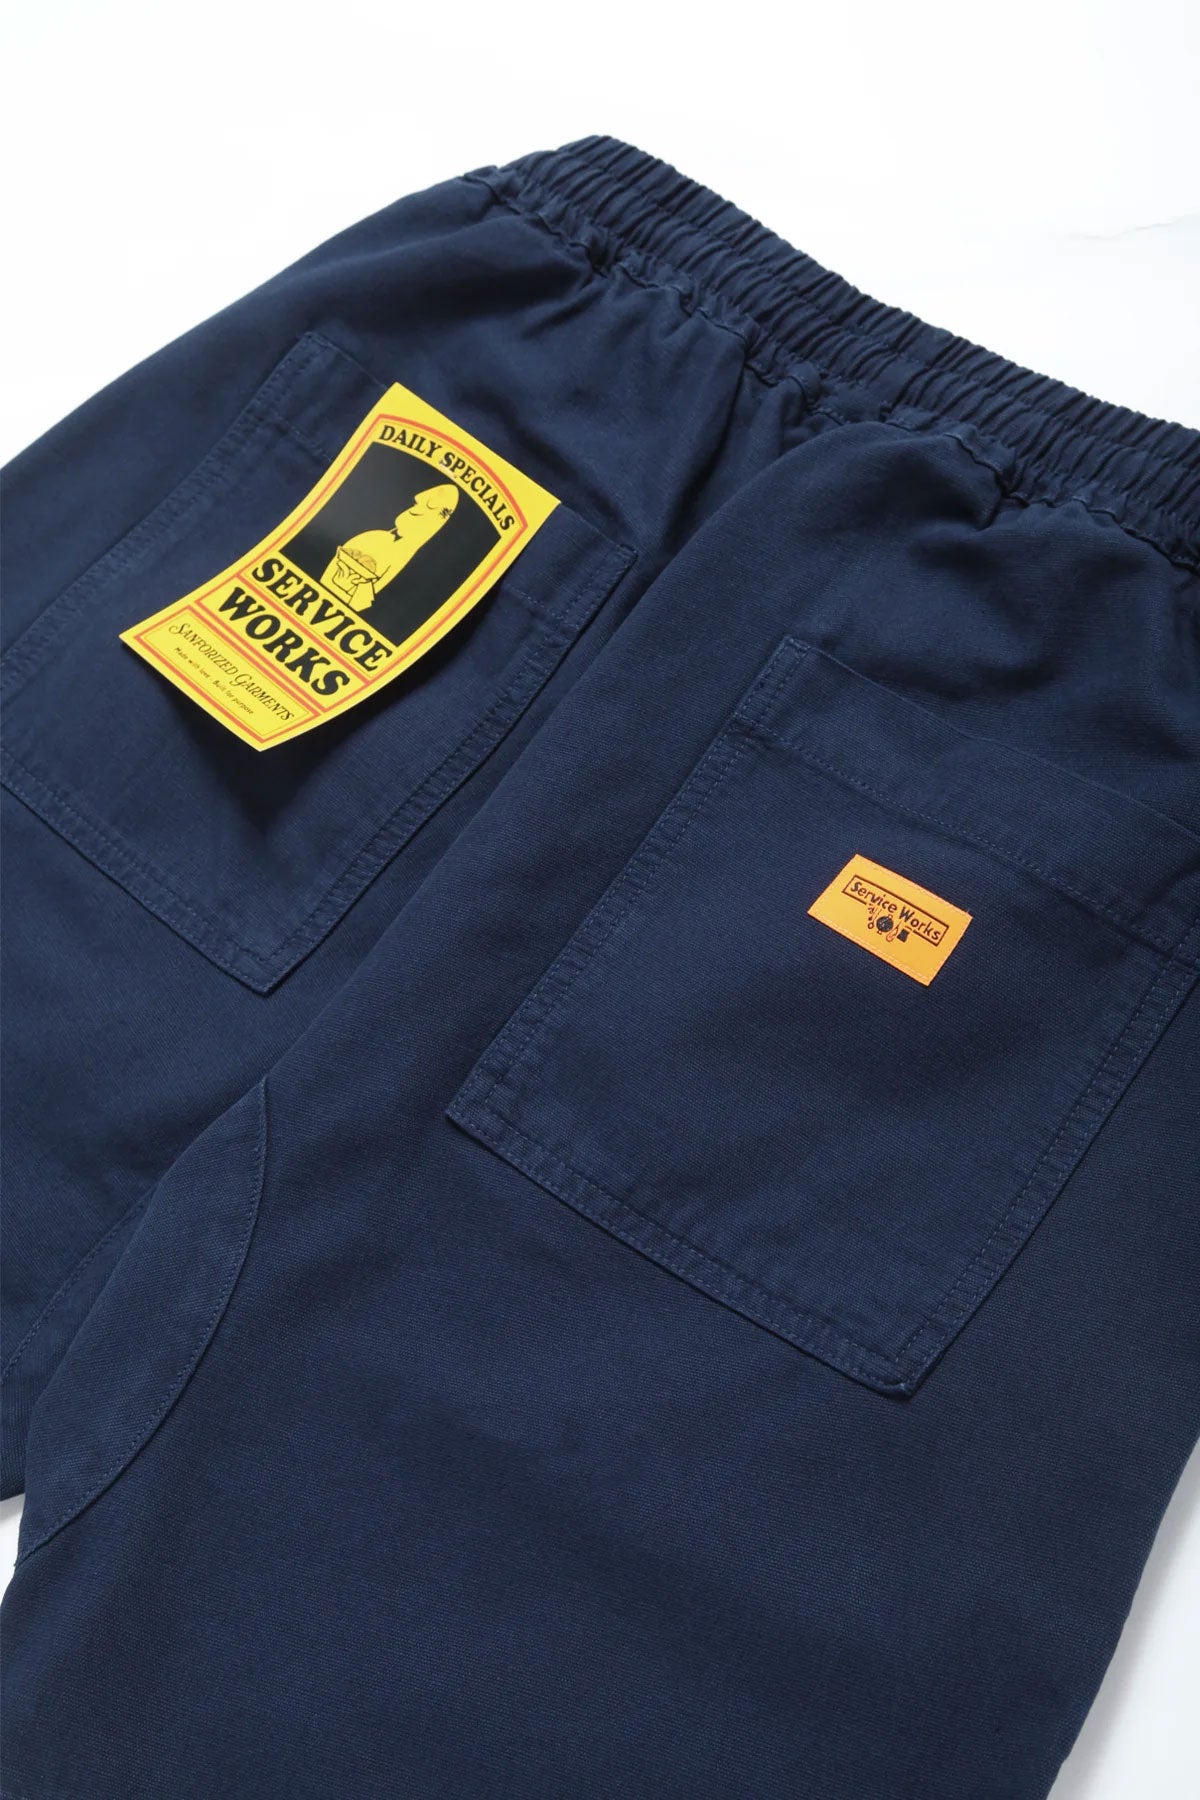 Service Works - Classic Canvas Chef Shorts in Navy